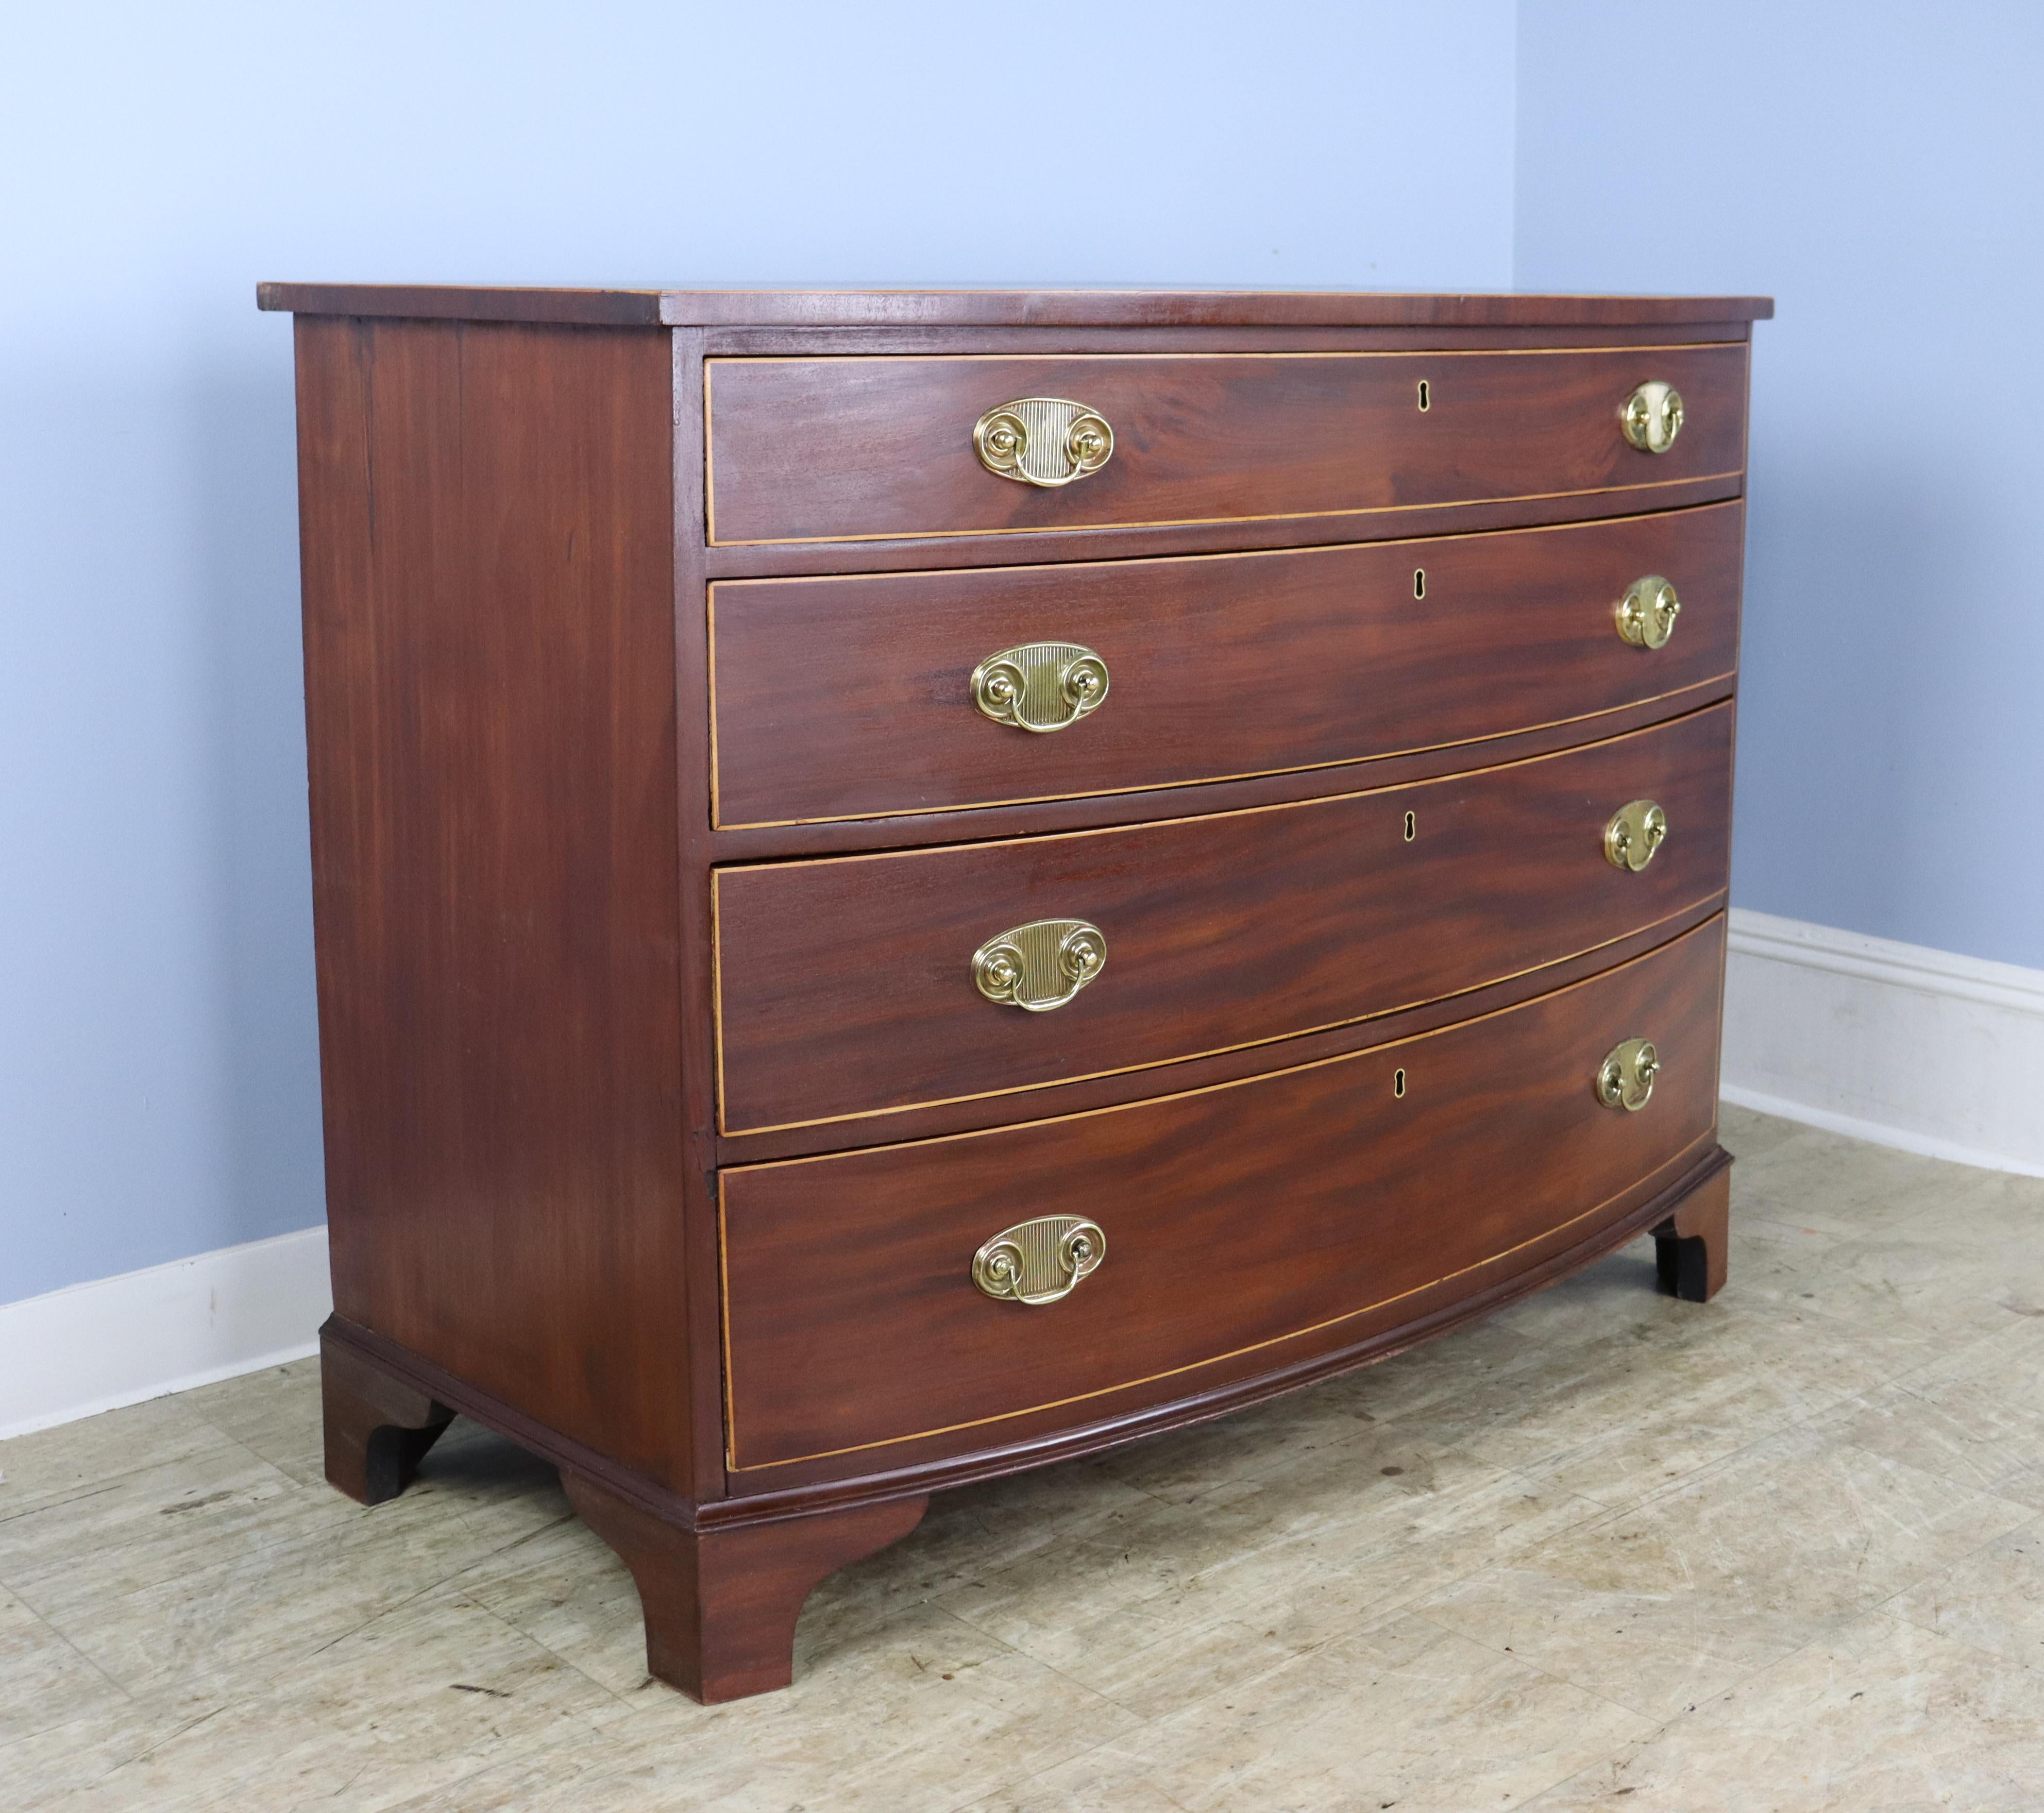 A striking Sheraton bowfront chest of drawers, the Sheraton style being characterized most notably by contrasting veneer inlays. In this piece we have an intricate string of inlay around the top, in good condition, as well as satinwood detail around